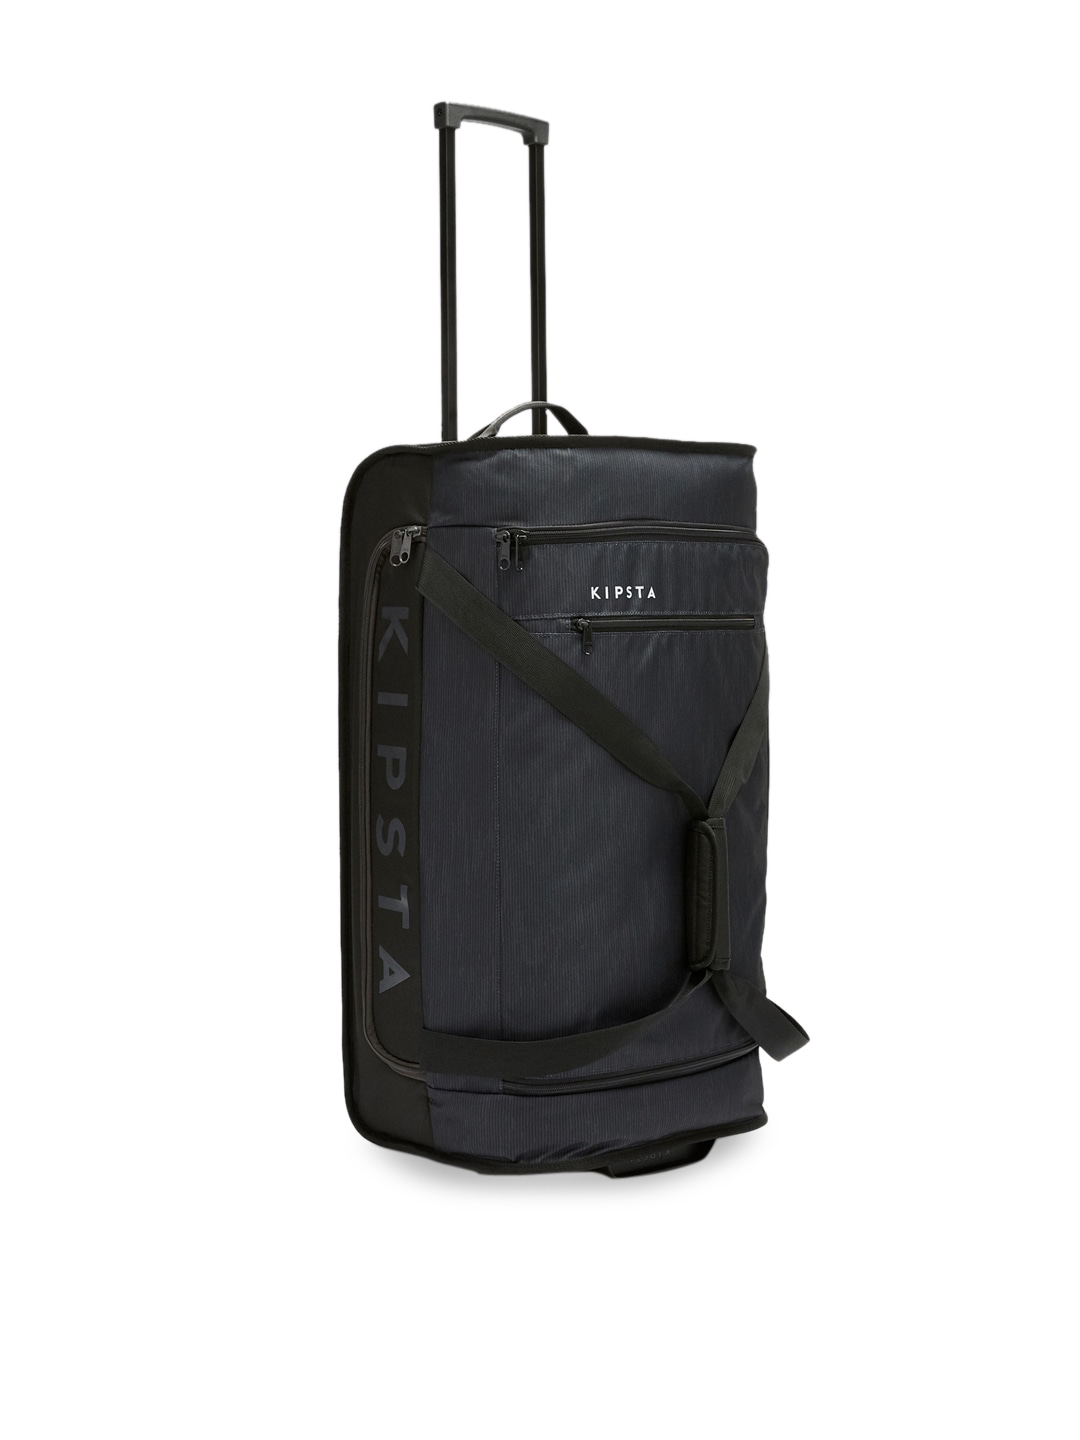 Kipsta By Decathlon Unisex Black Solid Sports Trolley Bag Price in India